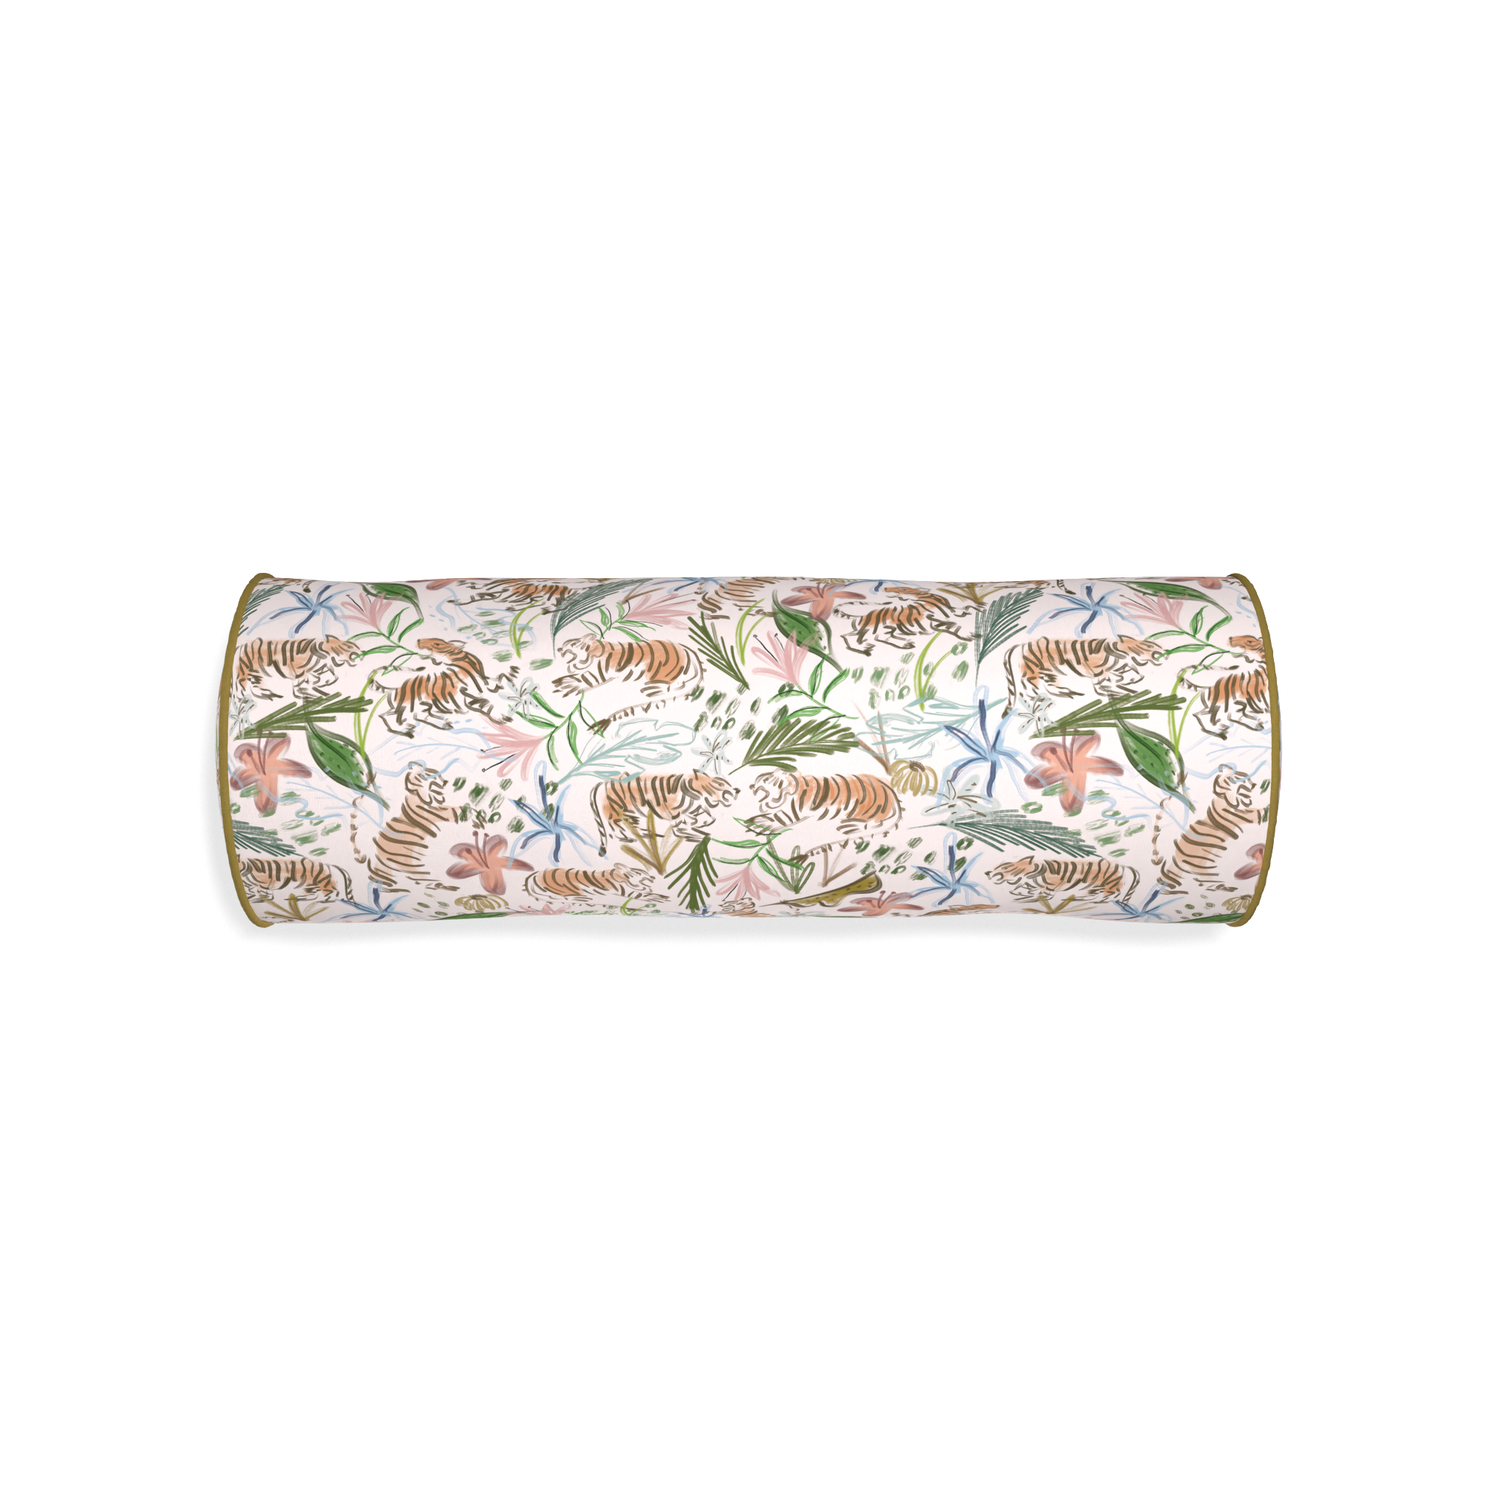 Bolster frida pink custom pink chinoiserie tigerpillow with c piping on white background